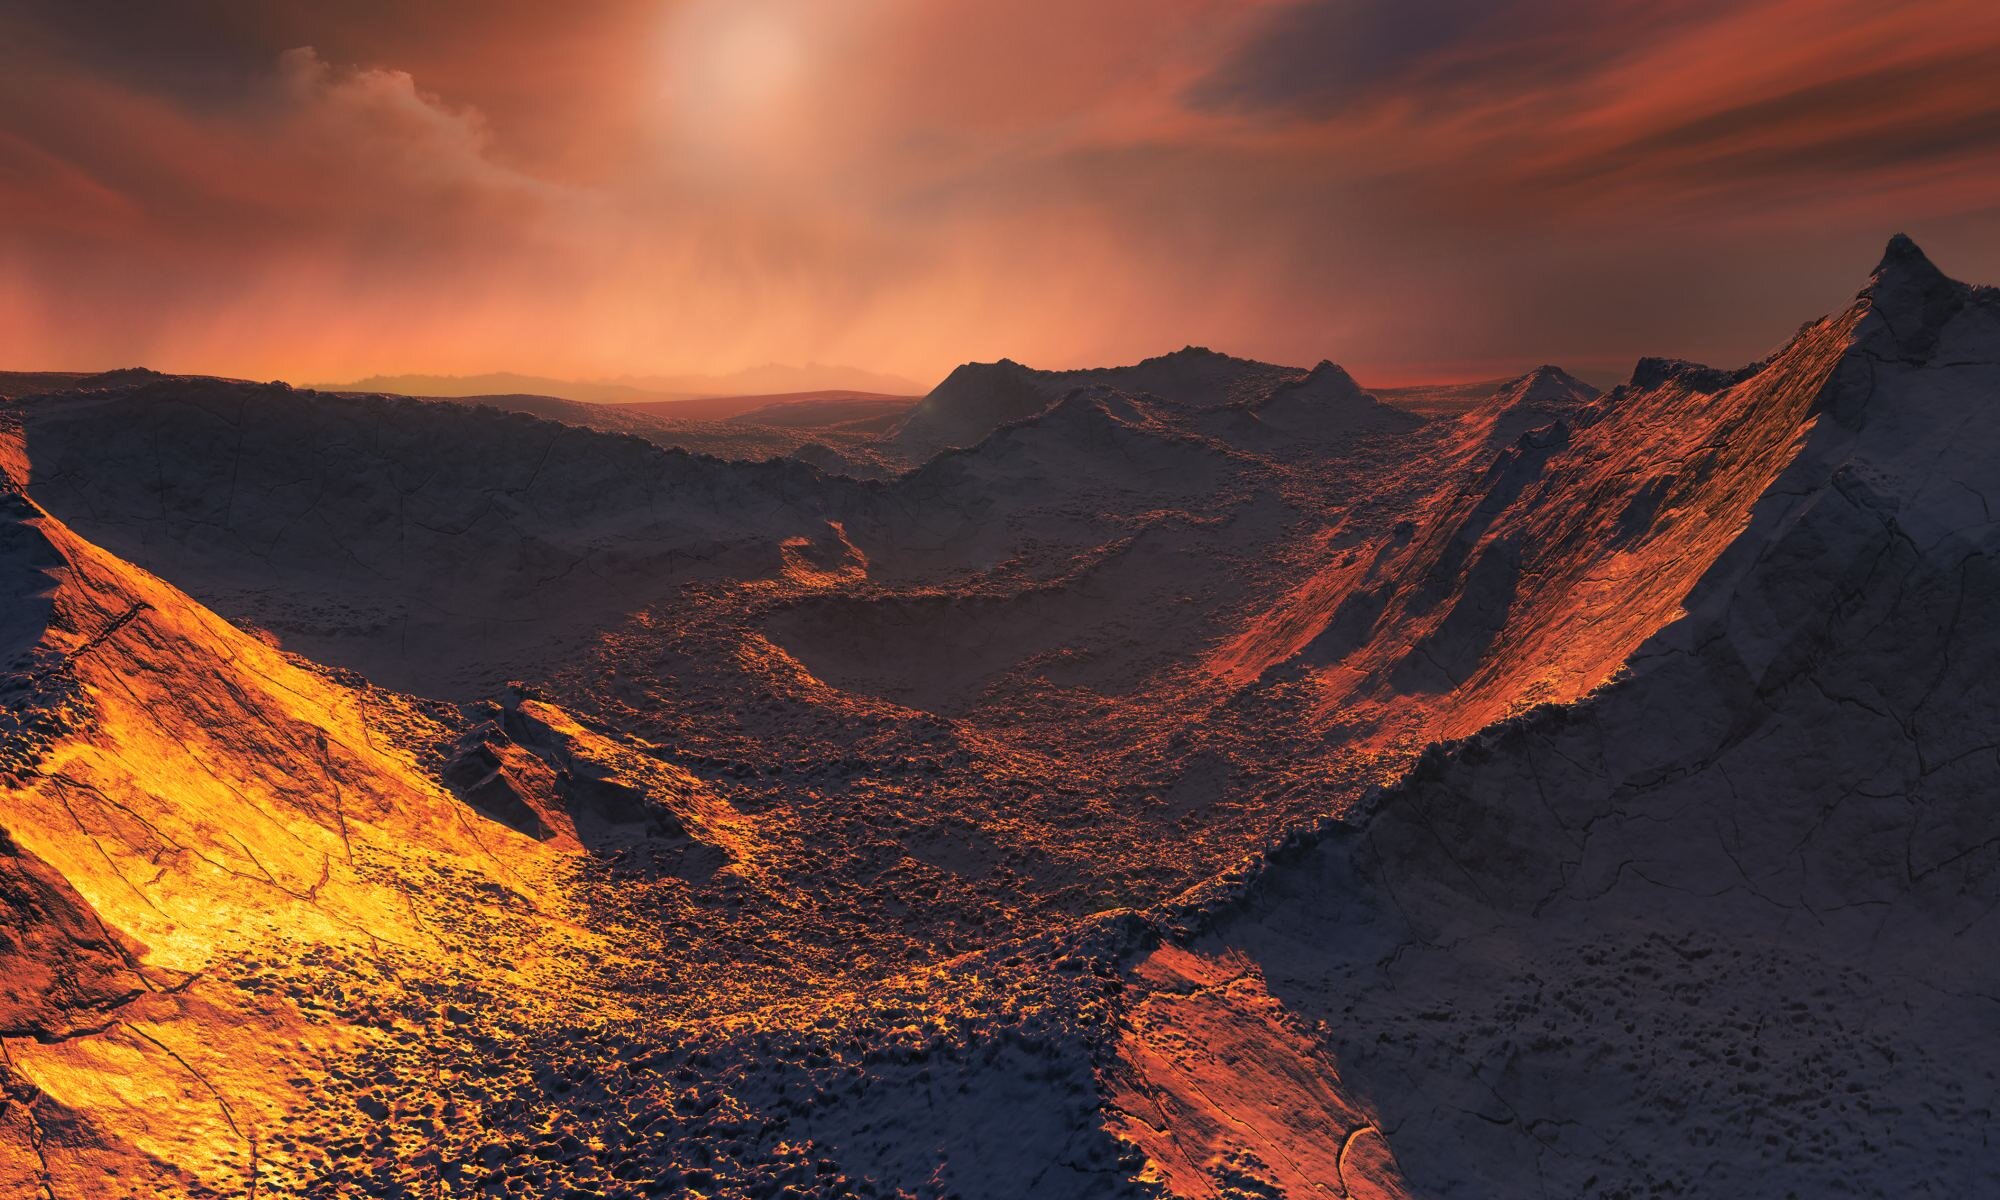 The world's largest radio telescope has scanned Barnard's star for extraterrestrial signals